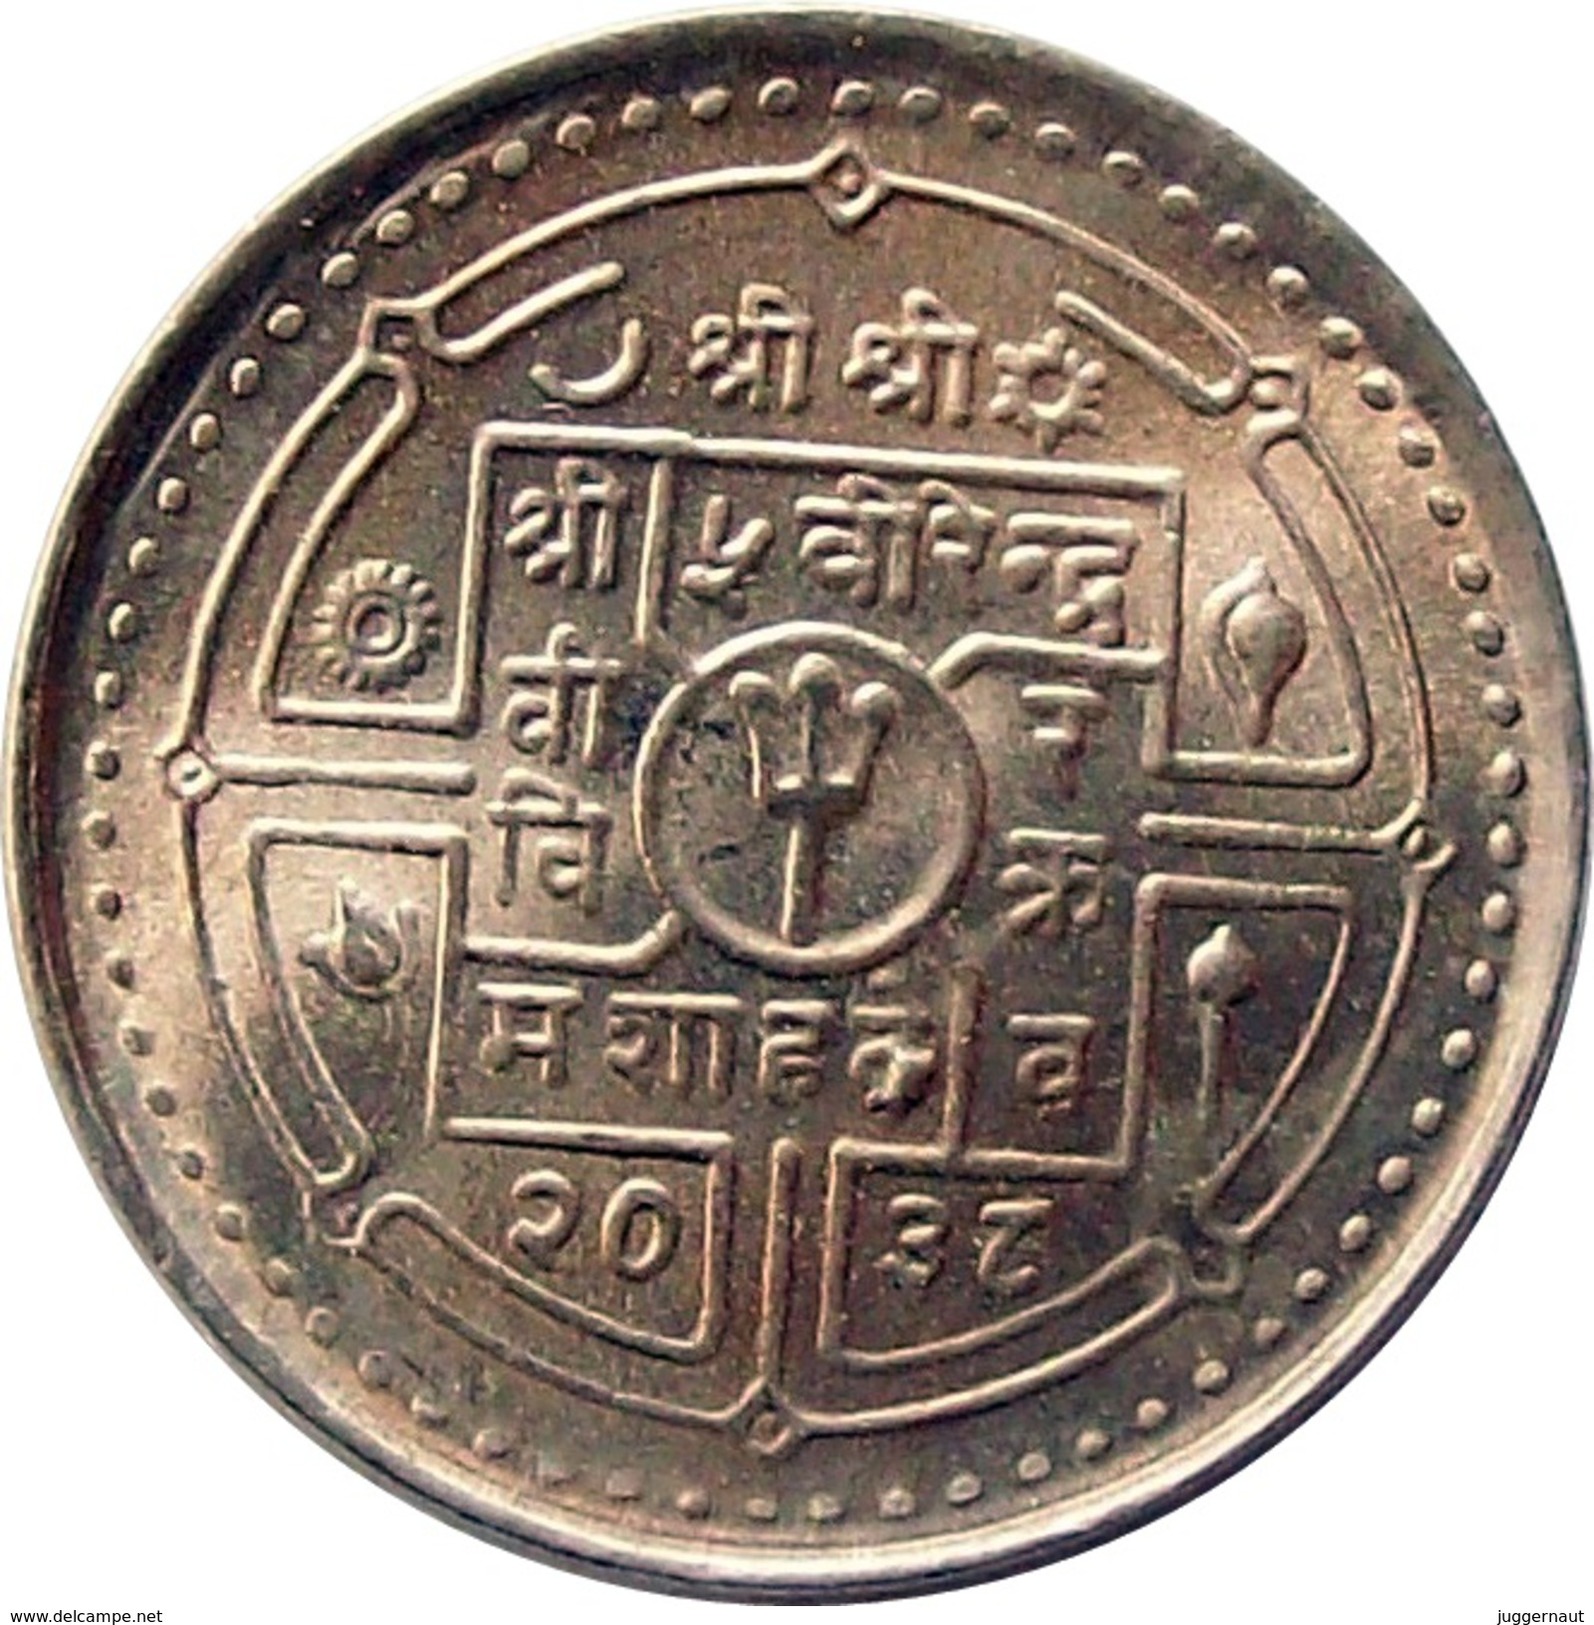 INTERNATIONAL YEAR OF DISABLED PERSONS 50 PAISA COIN NEPAL 1981 KM-824 UNCIRCULATED UNC - Népal